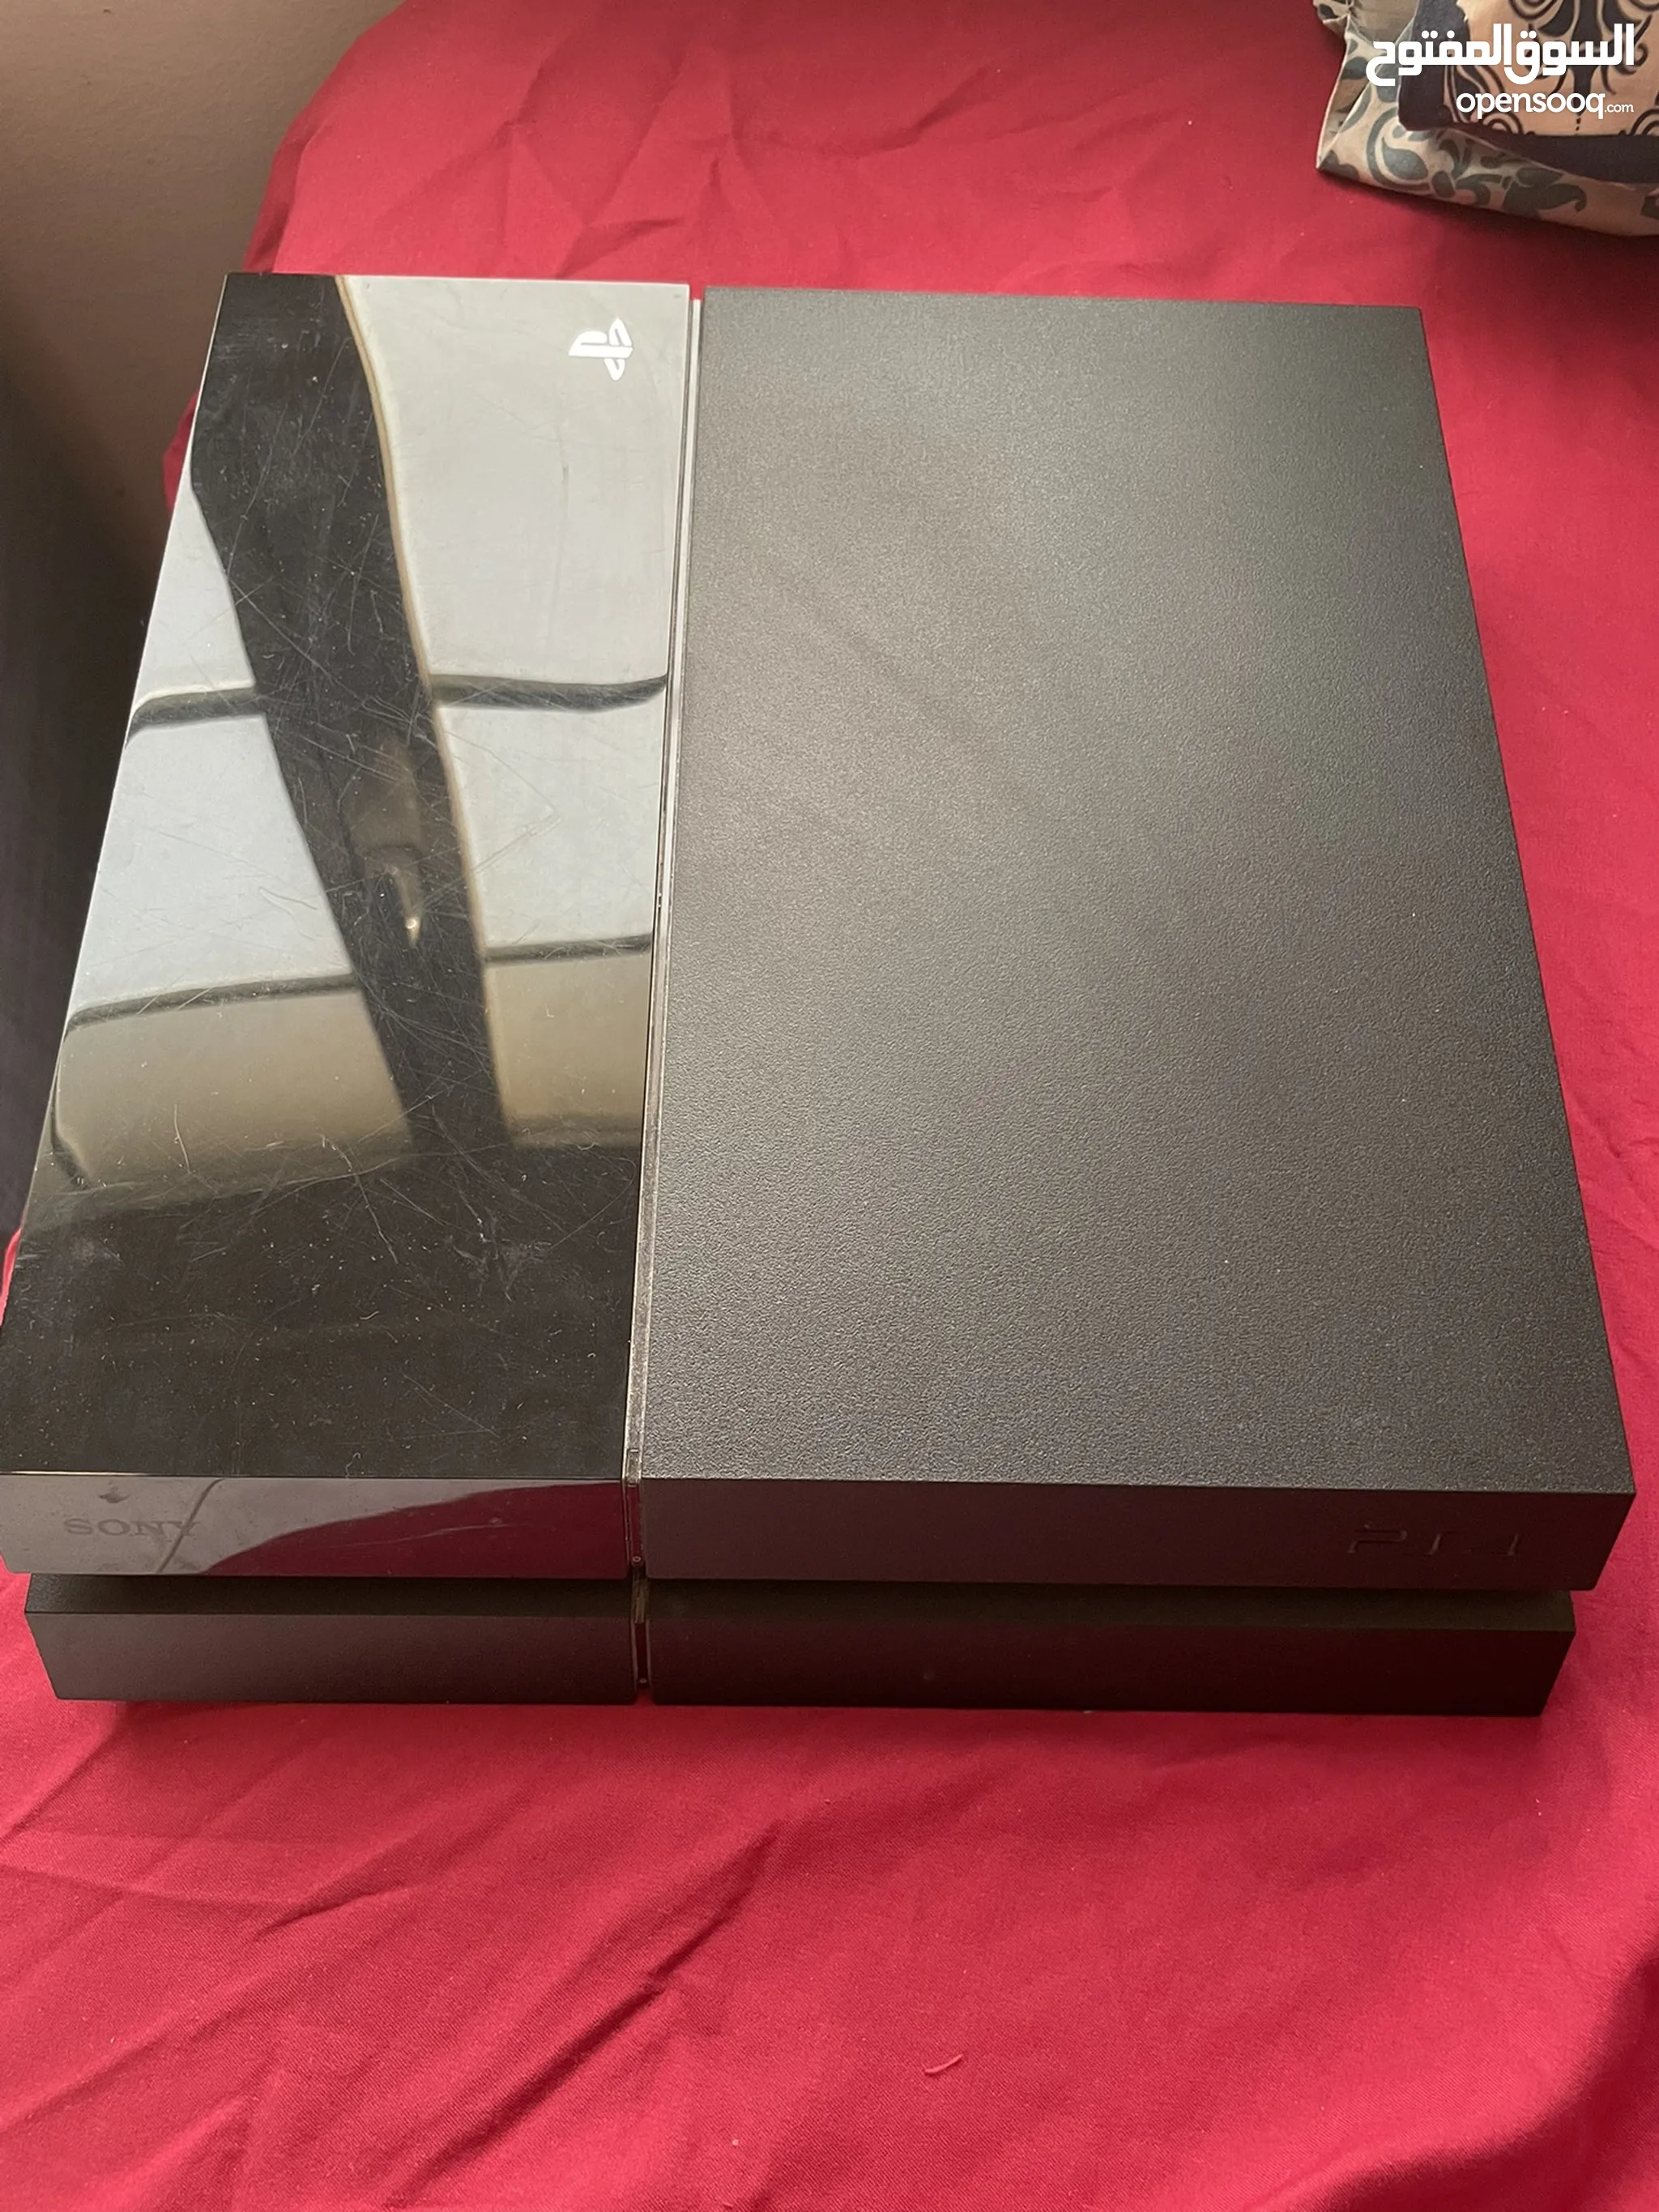 Playstation 4 For Sale in Kuwait : Used : Best Prices | OpenSooq